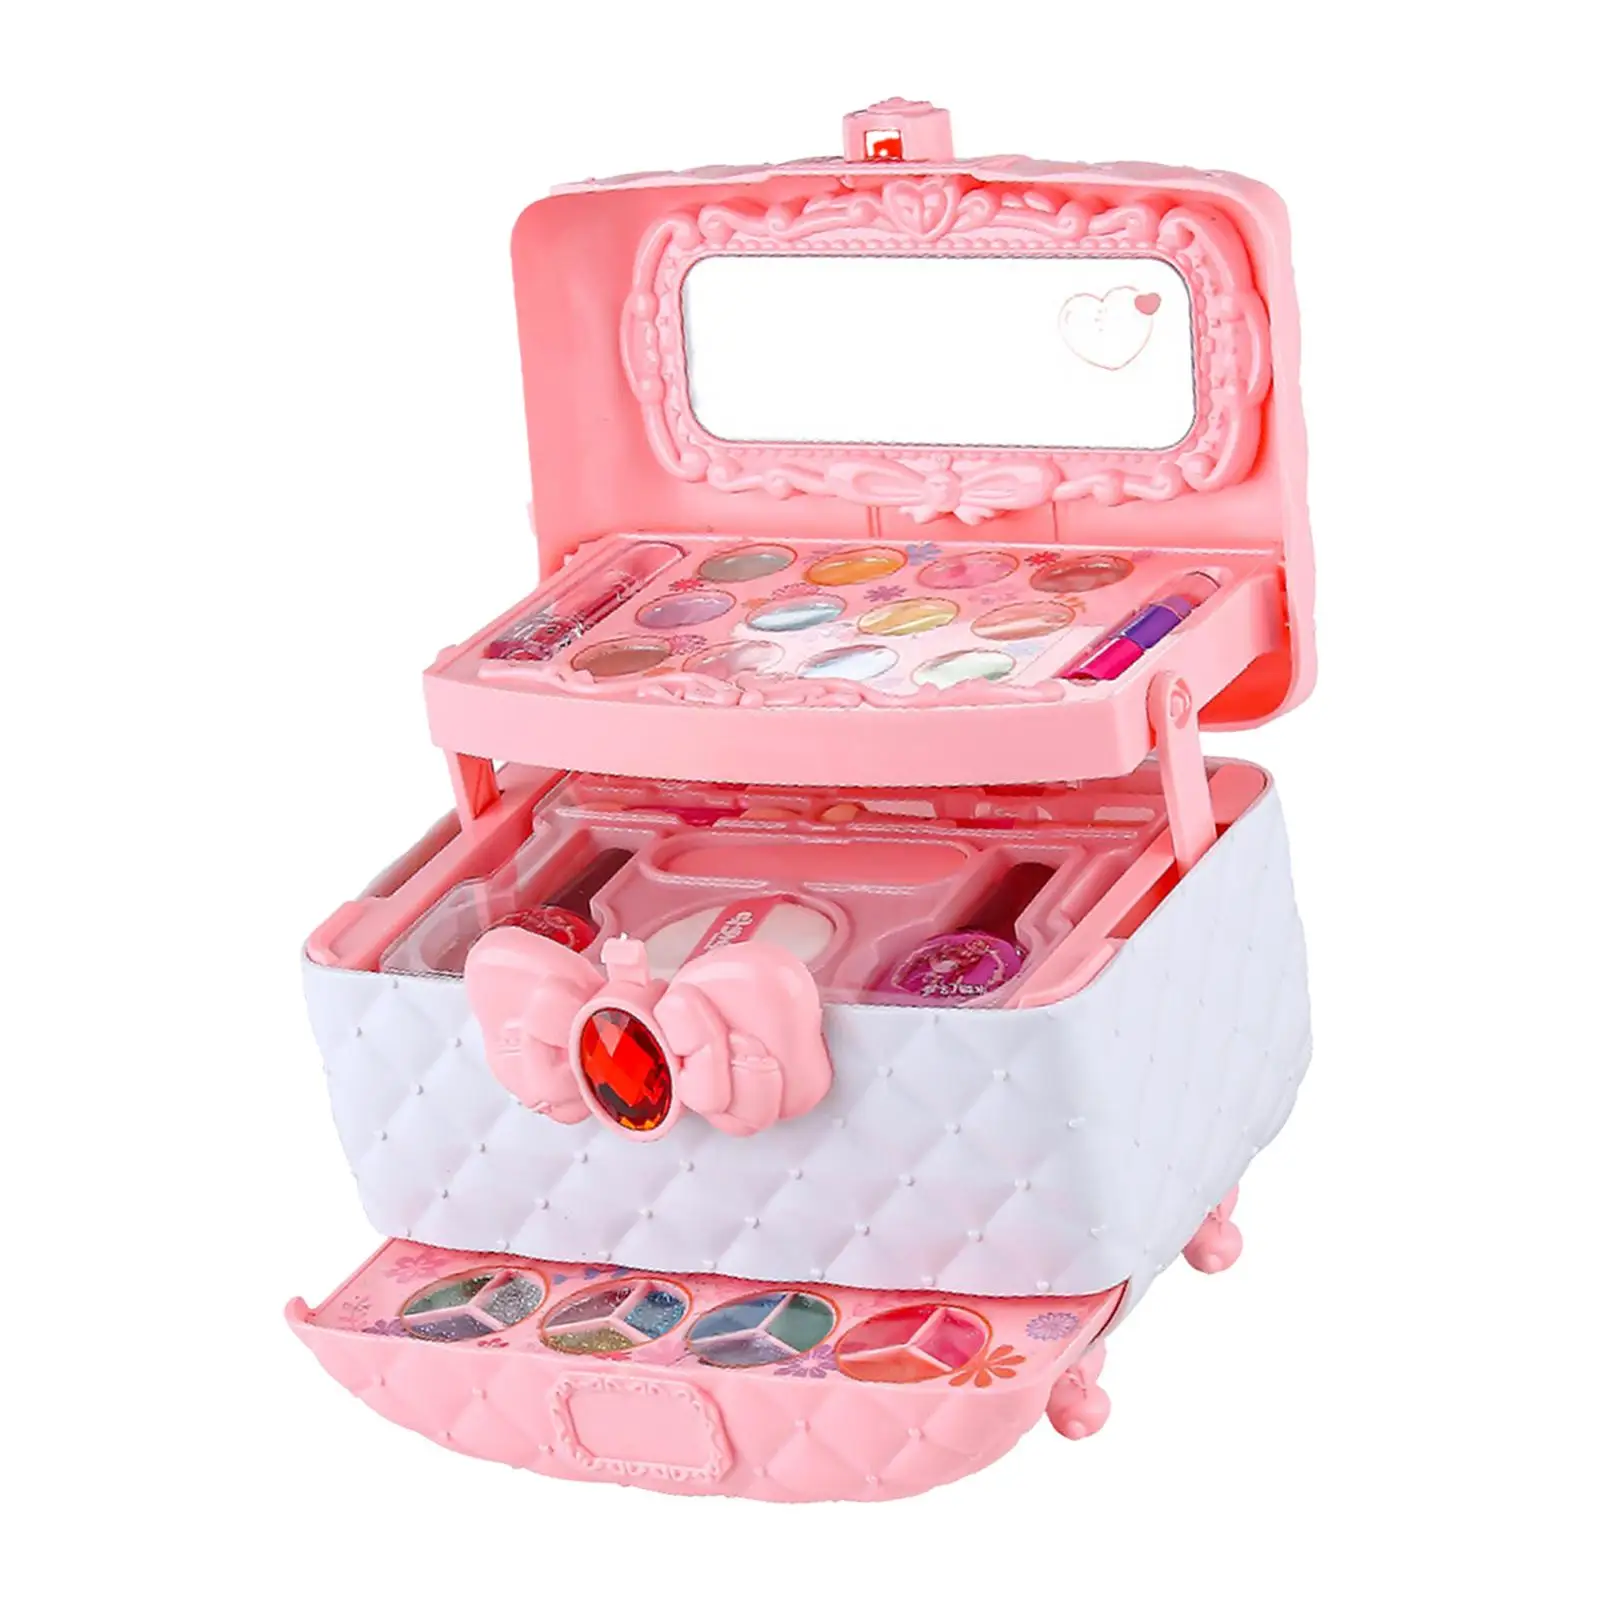 Makeup Vanity Toy Princess Toy with Cosmetic Case with Mirror Kids Makeup Set for Kids Girls Children Toddlers Birthday Gifts